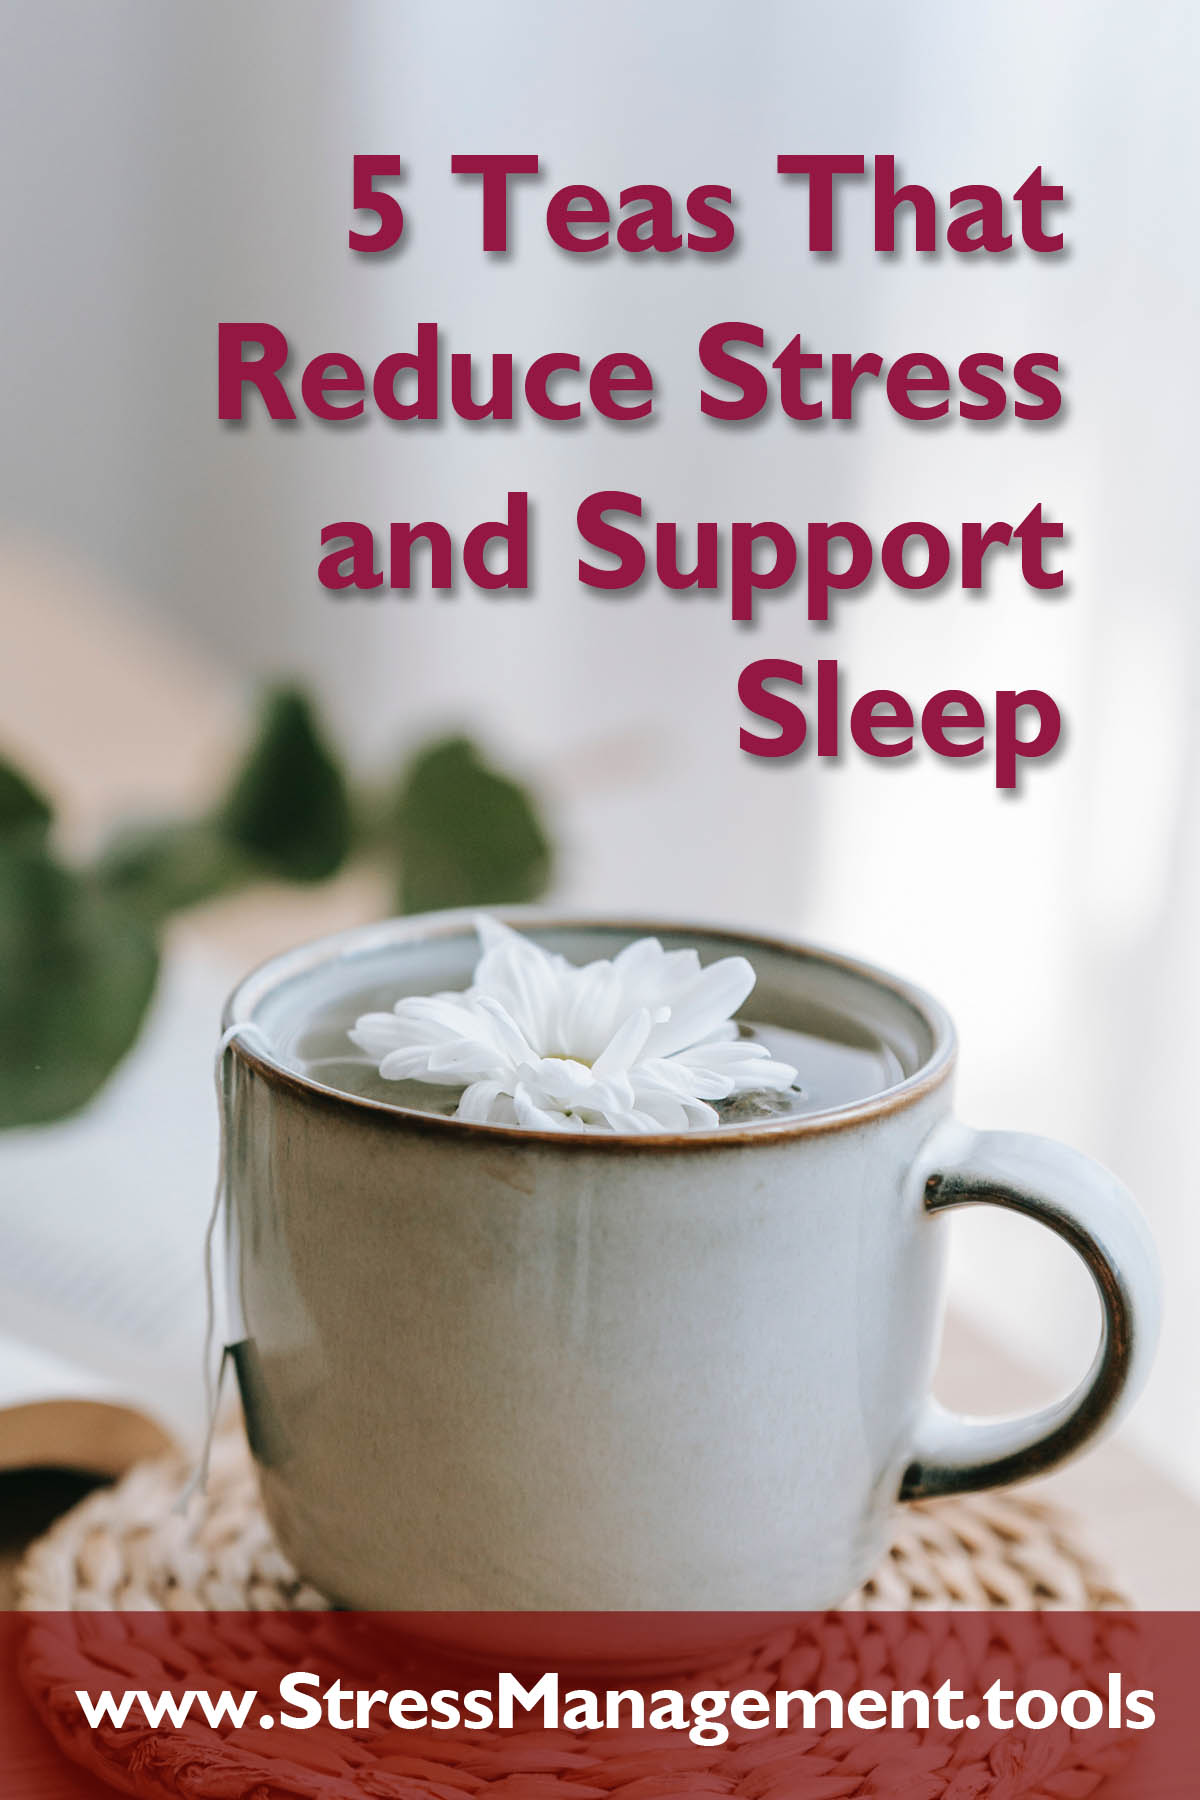 5 Teas That Reduce Stress and Support Sleep